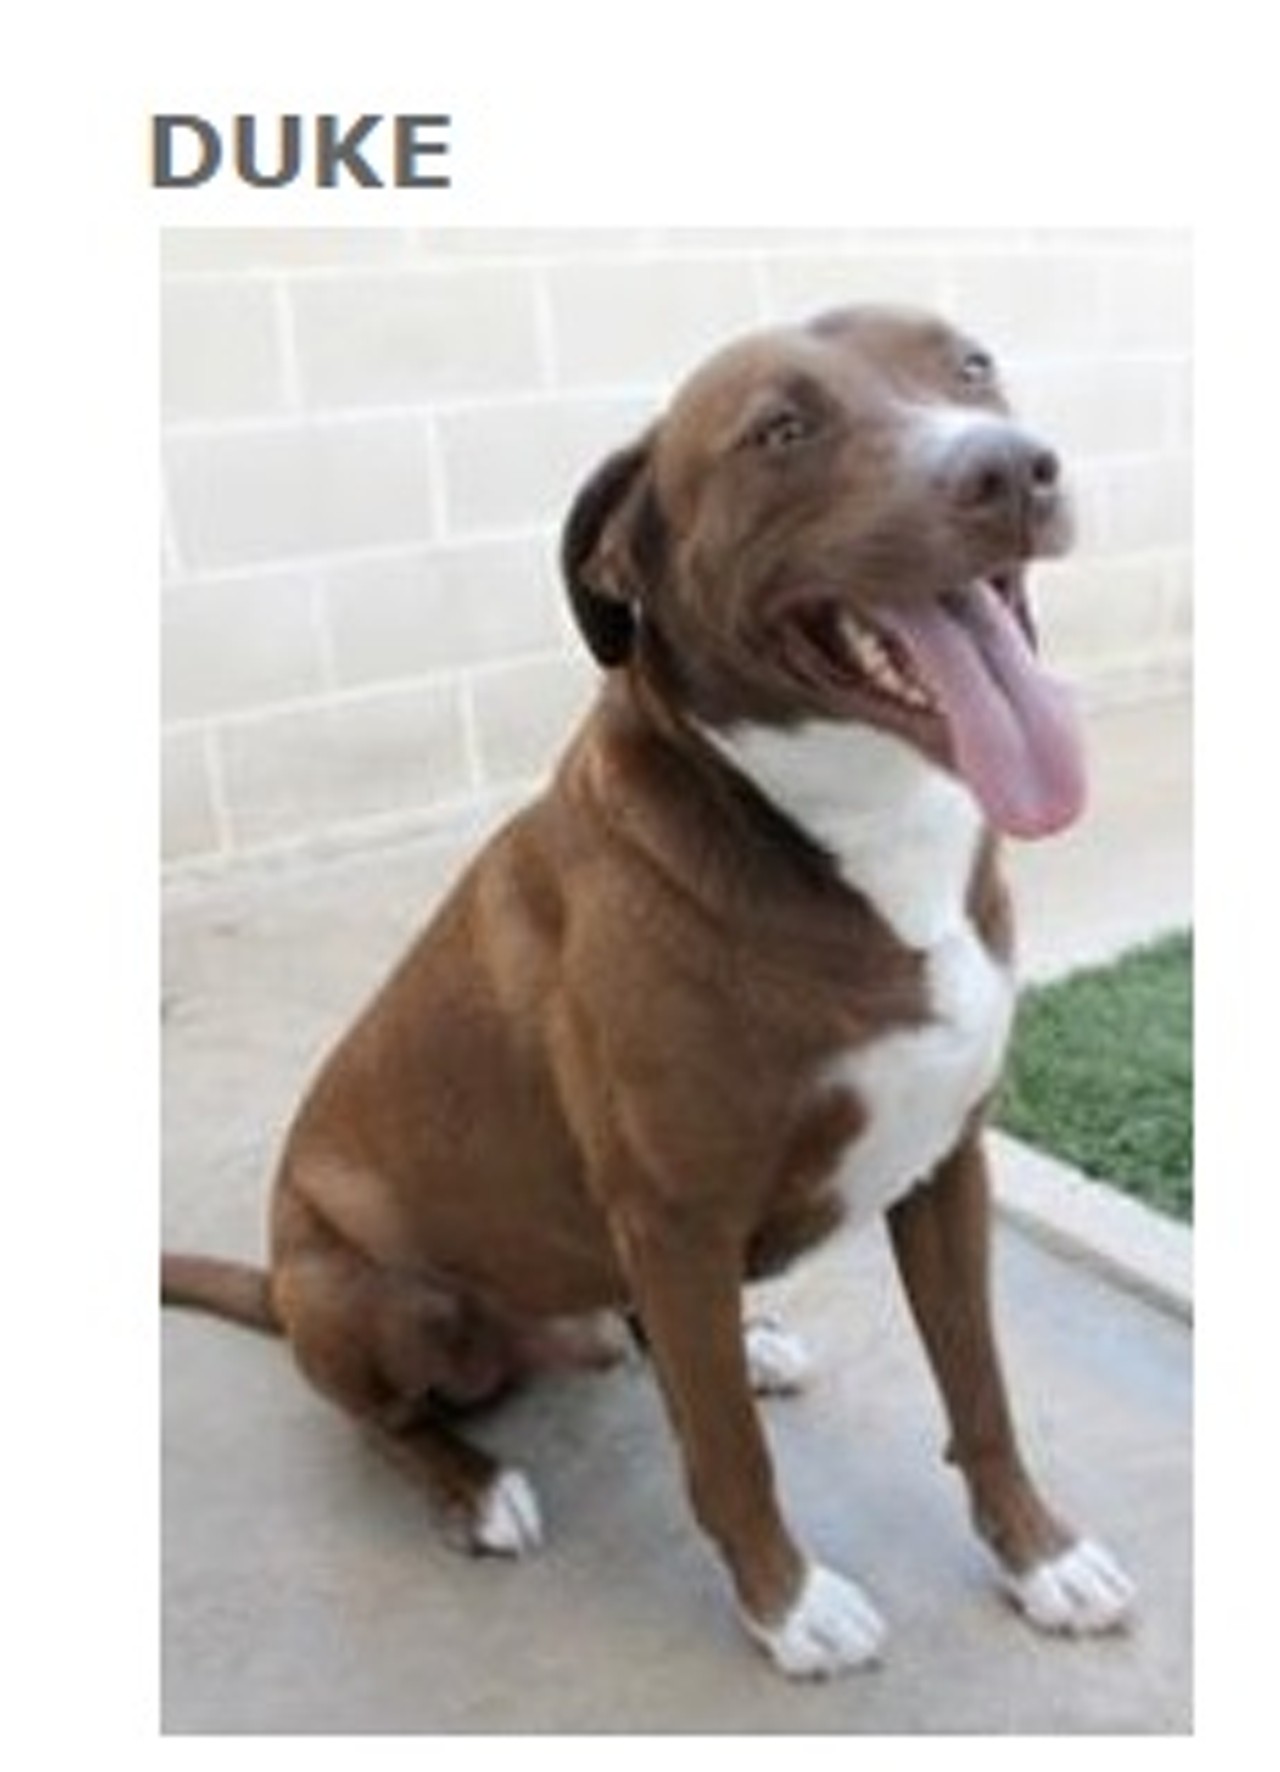 Duke is a chocolate and white Retriever/ Lab mix, he is about 5 years and 4 months old. He currently lives at the San Antonio Humane Society (ID # 20406401). He and other fun pets like him will be available for adoption this Saturday May 23rd at Bark in the Park&#151;Perrito Grito at Rosedale Park.